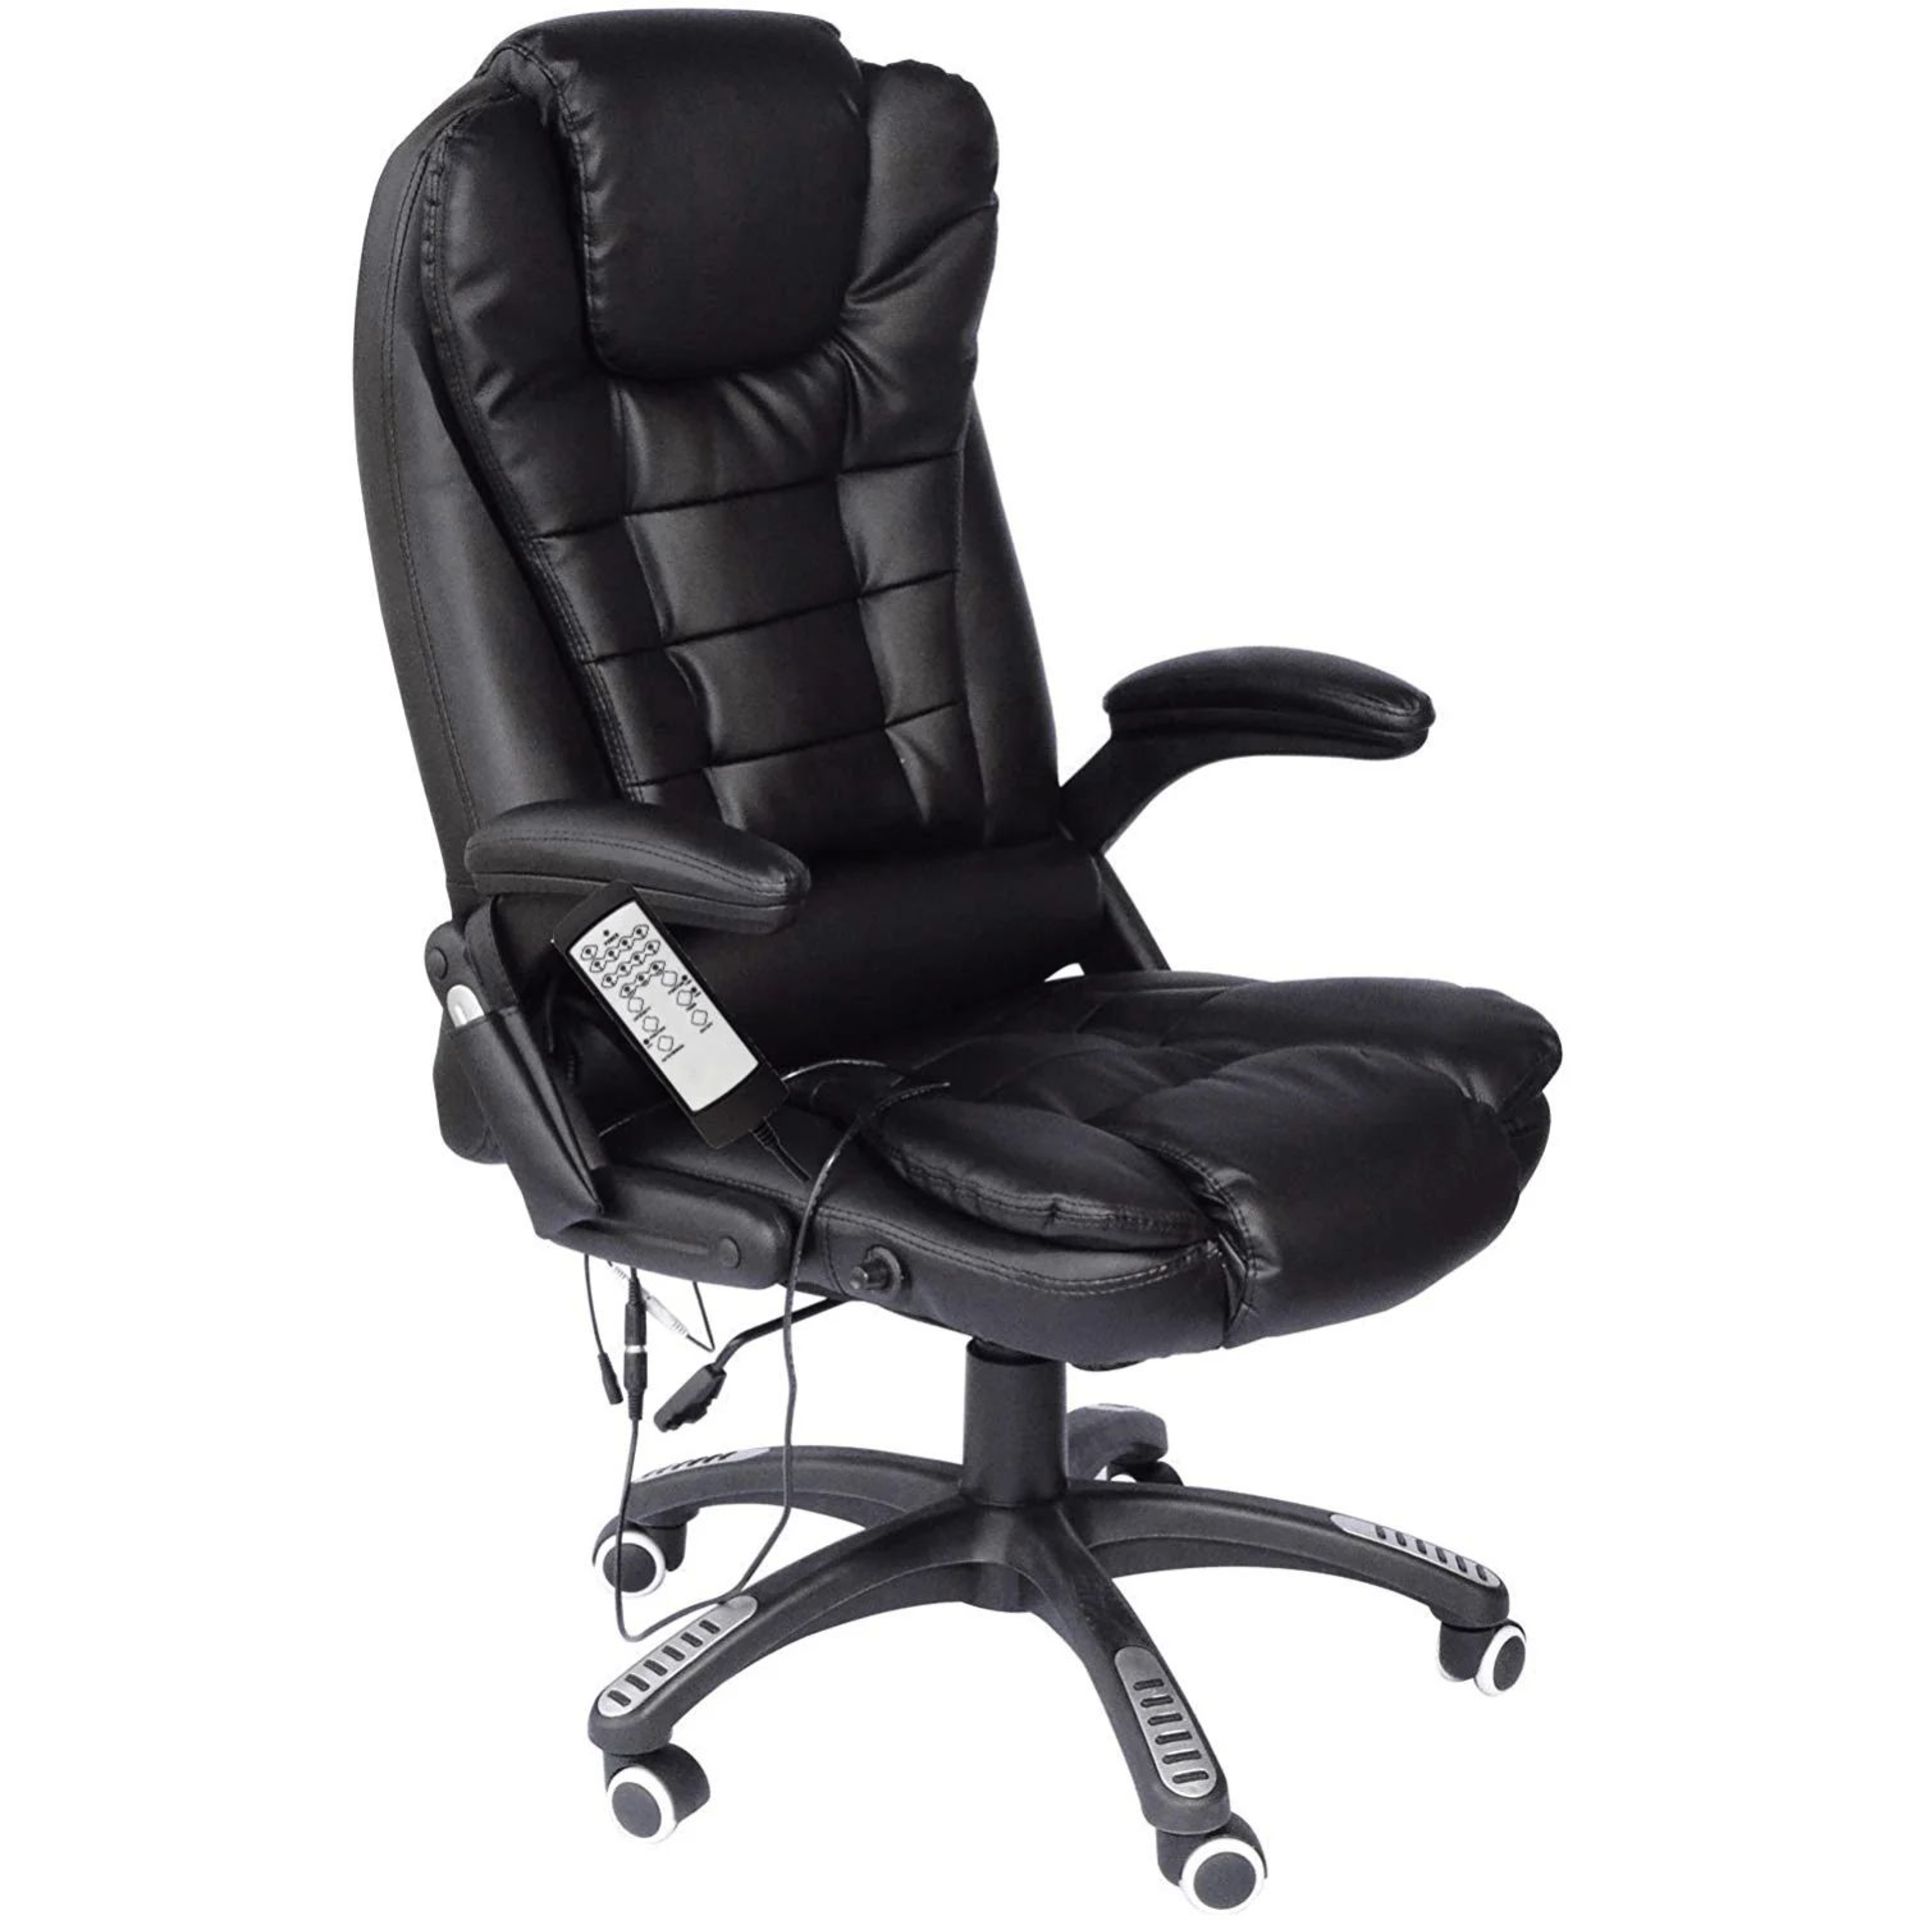 Executive Recline Padded Swivel Office Chair with Vibrating Massage Function, MM17 Black. - SR24.